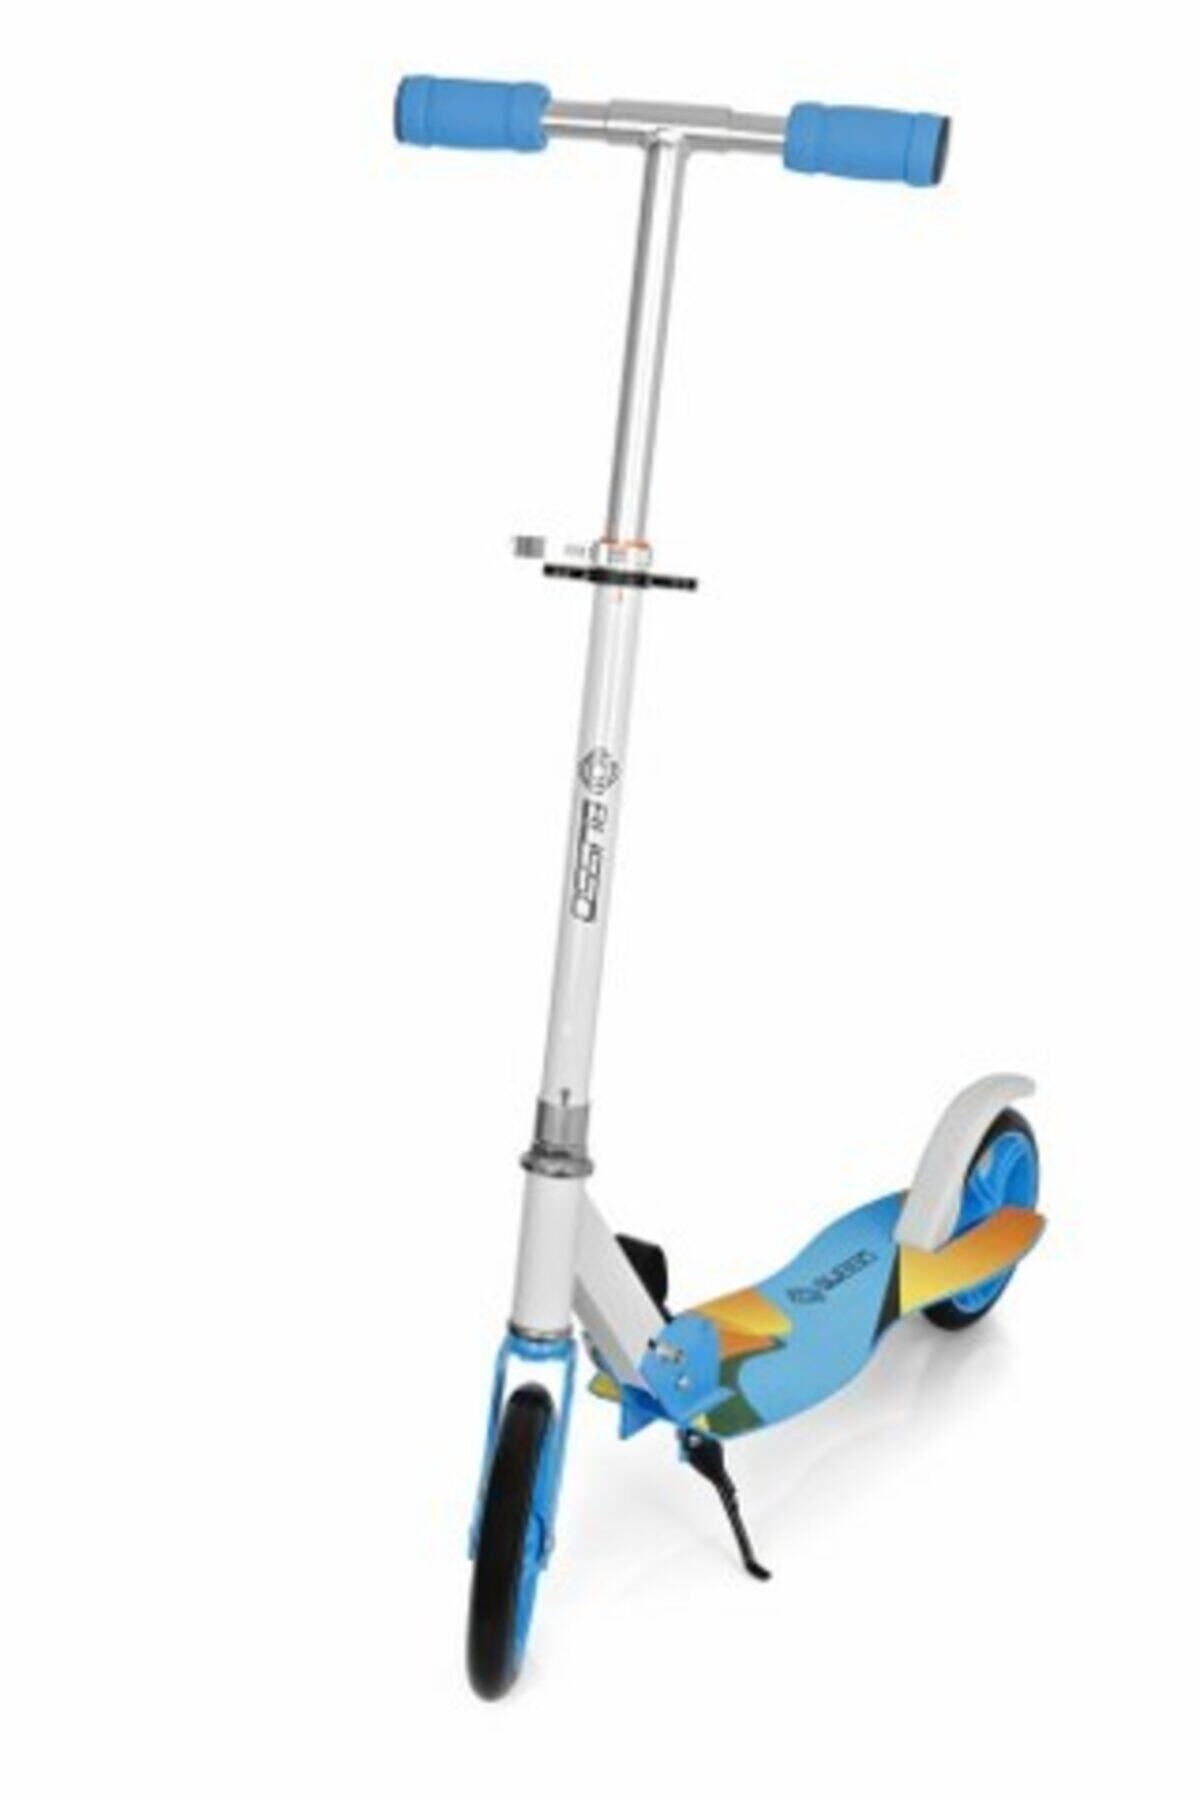 Busso Unisex Scooter - Busso Scooter S200E Scooter - S200E-BLUE